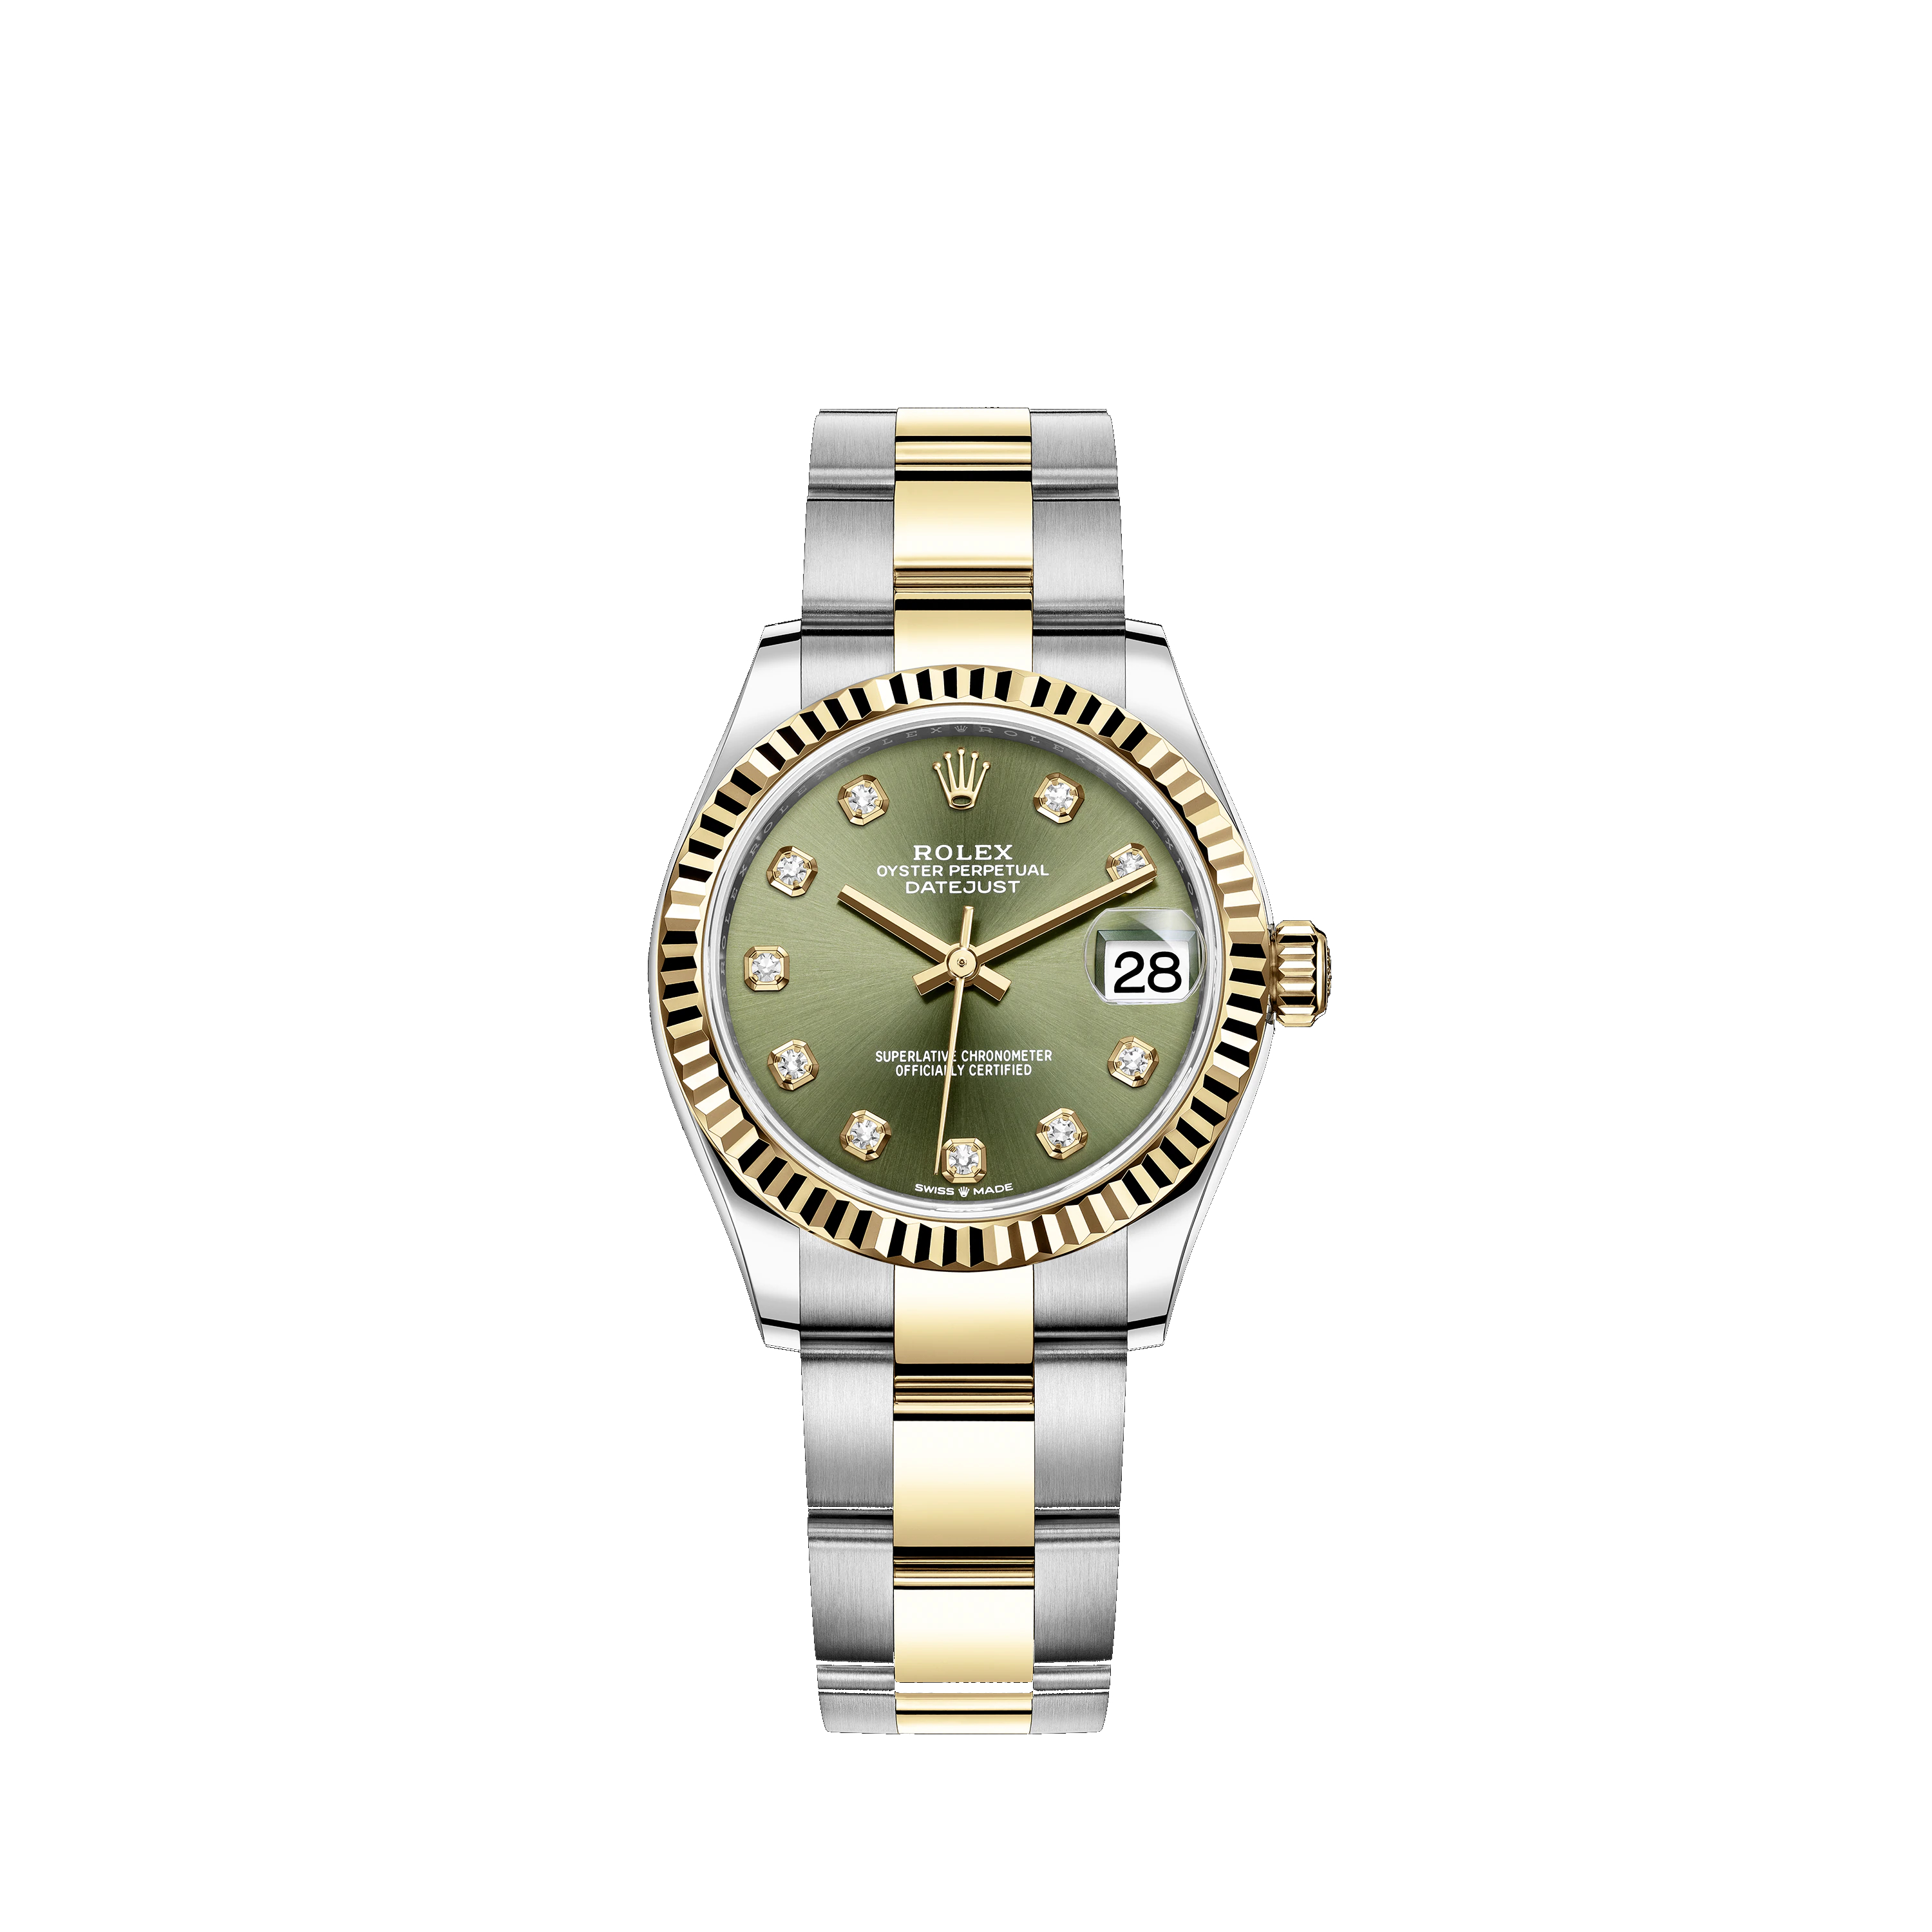 Datejust 31 278273 Gold & Stainless Steel Watch (Olive Green Set with Diamonds) - Click Image to Close